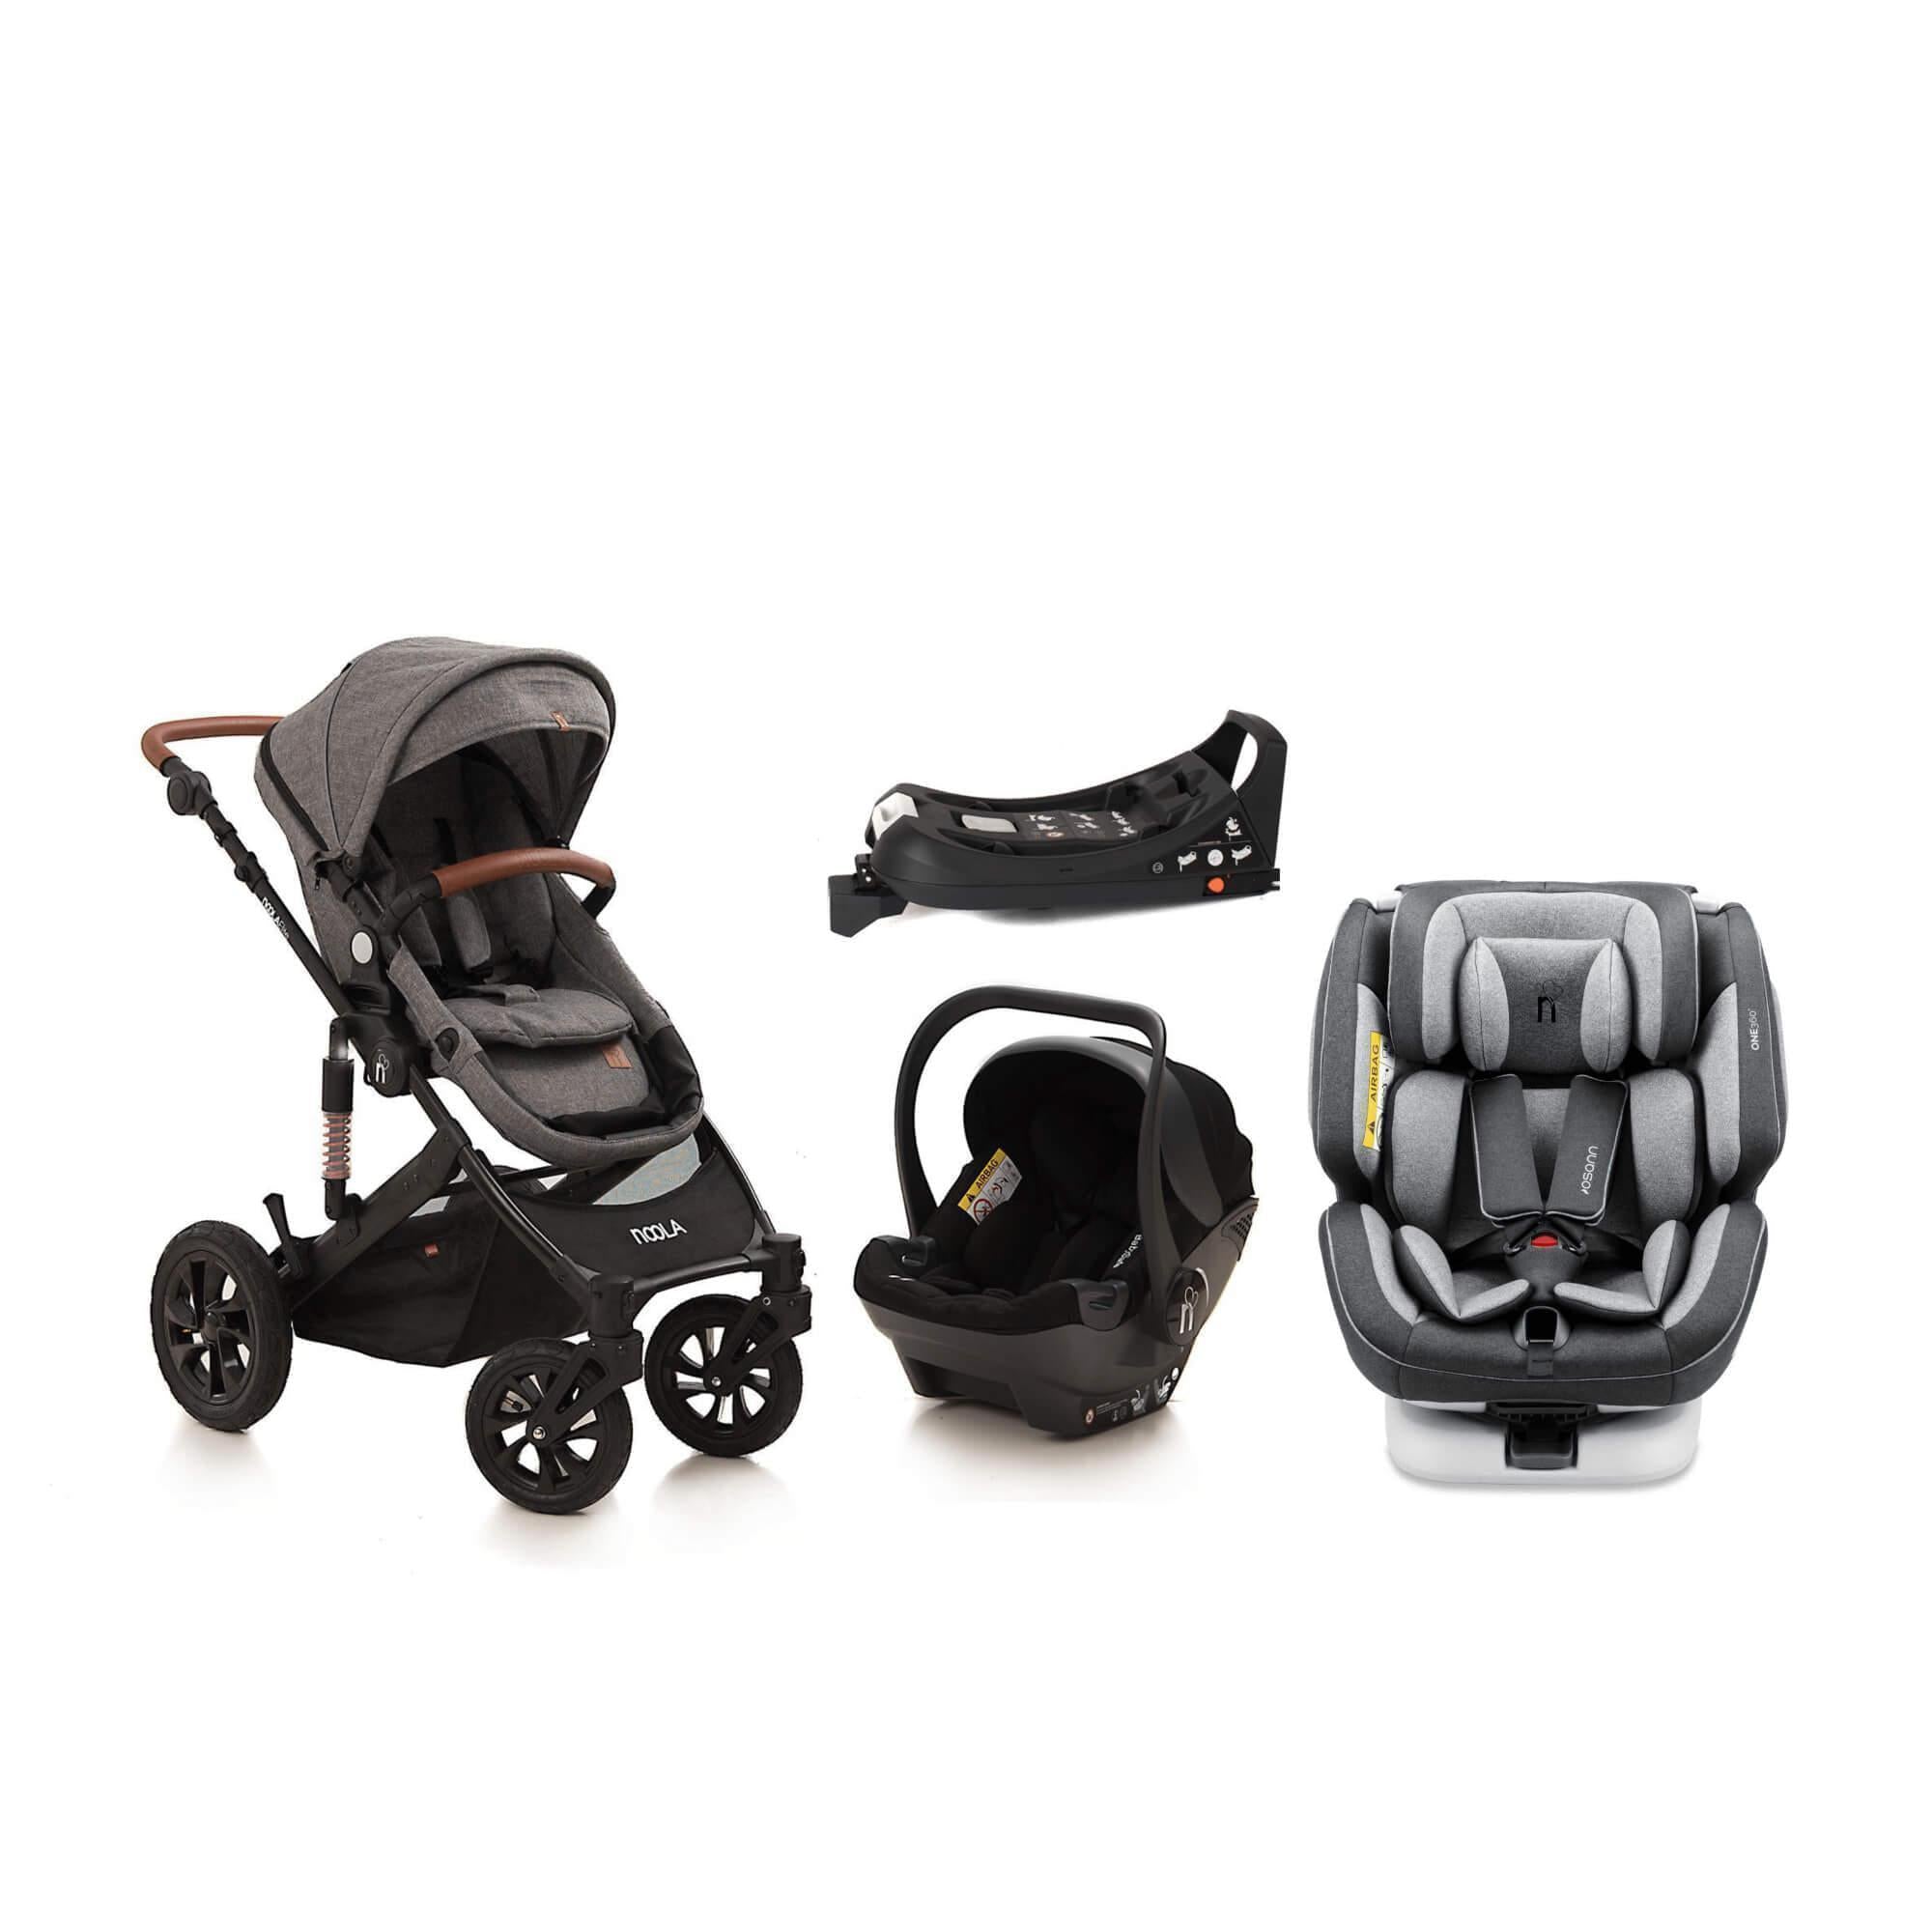 noola the elite 5in1 travel system lunar grey baby stroller #SELECT THE COLOUR OF YOUR ONE360_ONE360 | LUNAR GREY